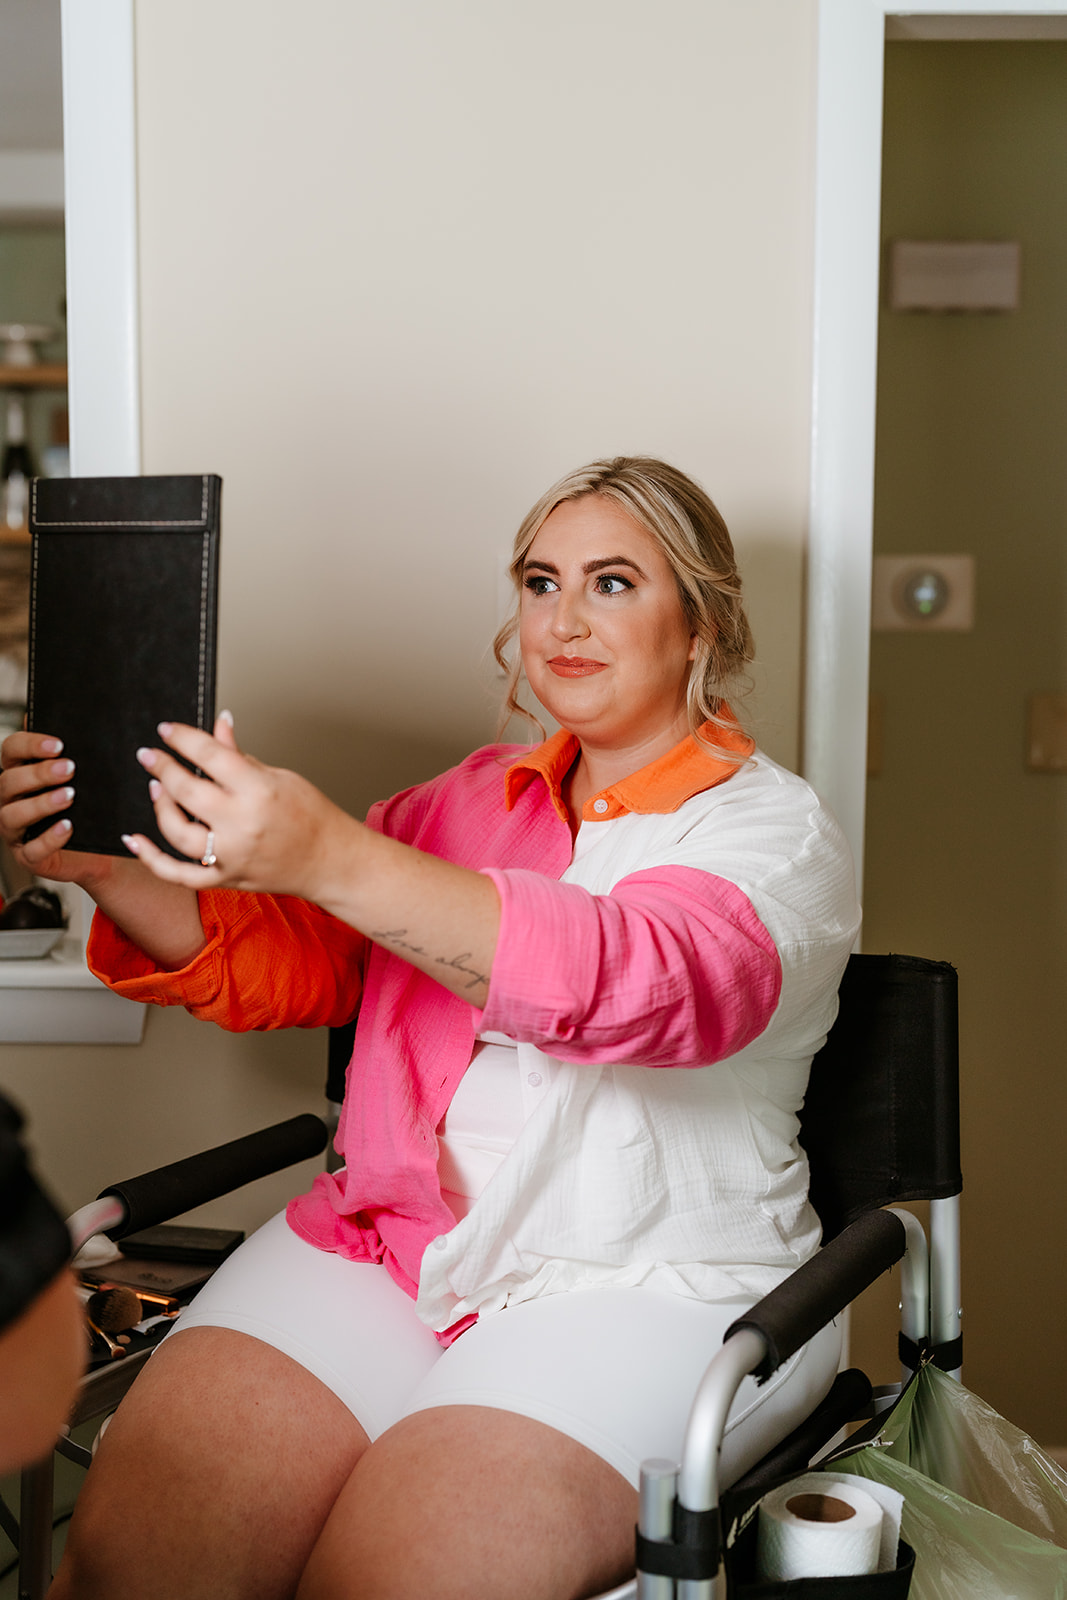 A woman in a white chair looks at a mirror she is holding, wearing a white shirt with pink detailing and a bright orange collar, with her hair styled up.